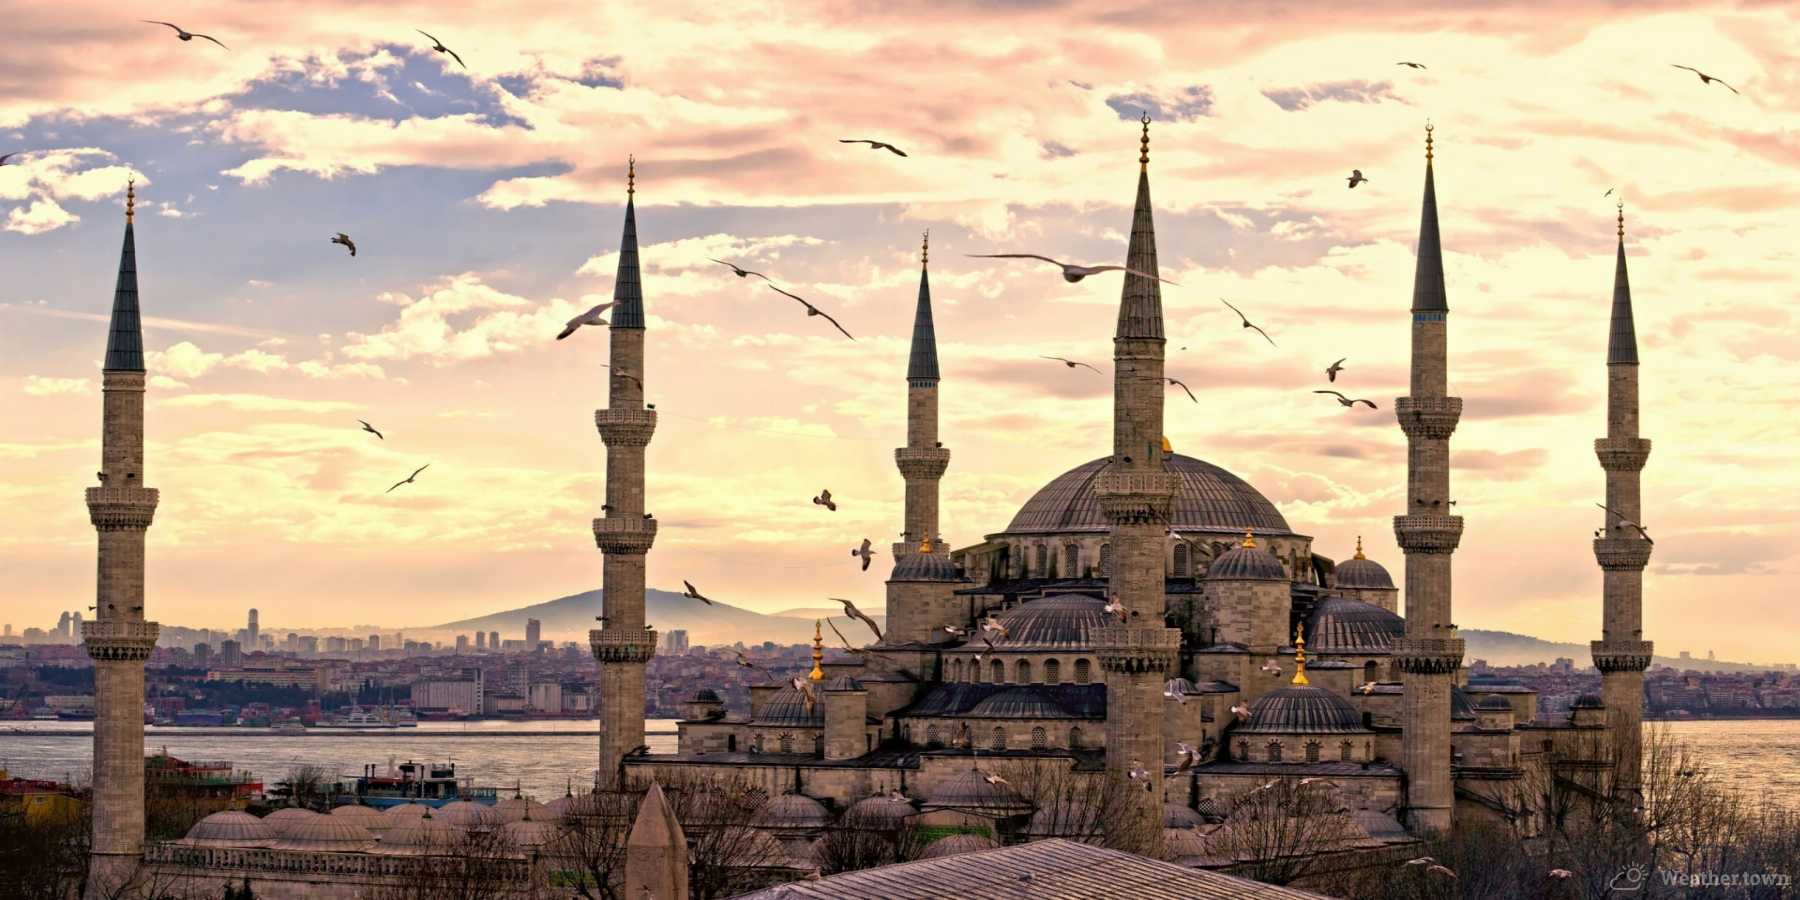 Istanbul is one of the major cities in Turkey.